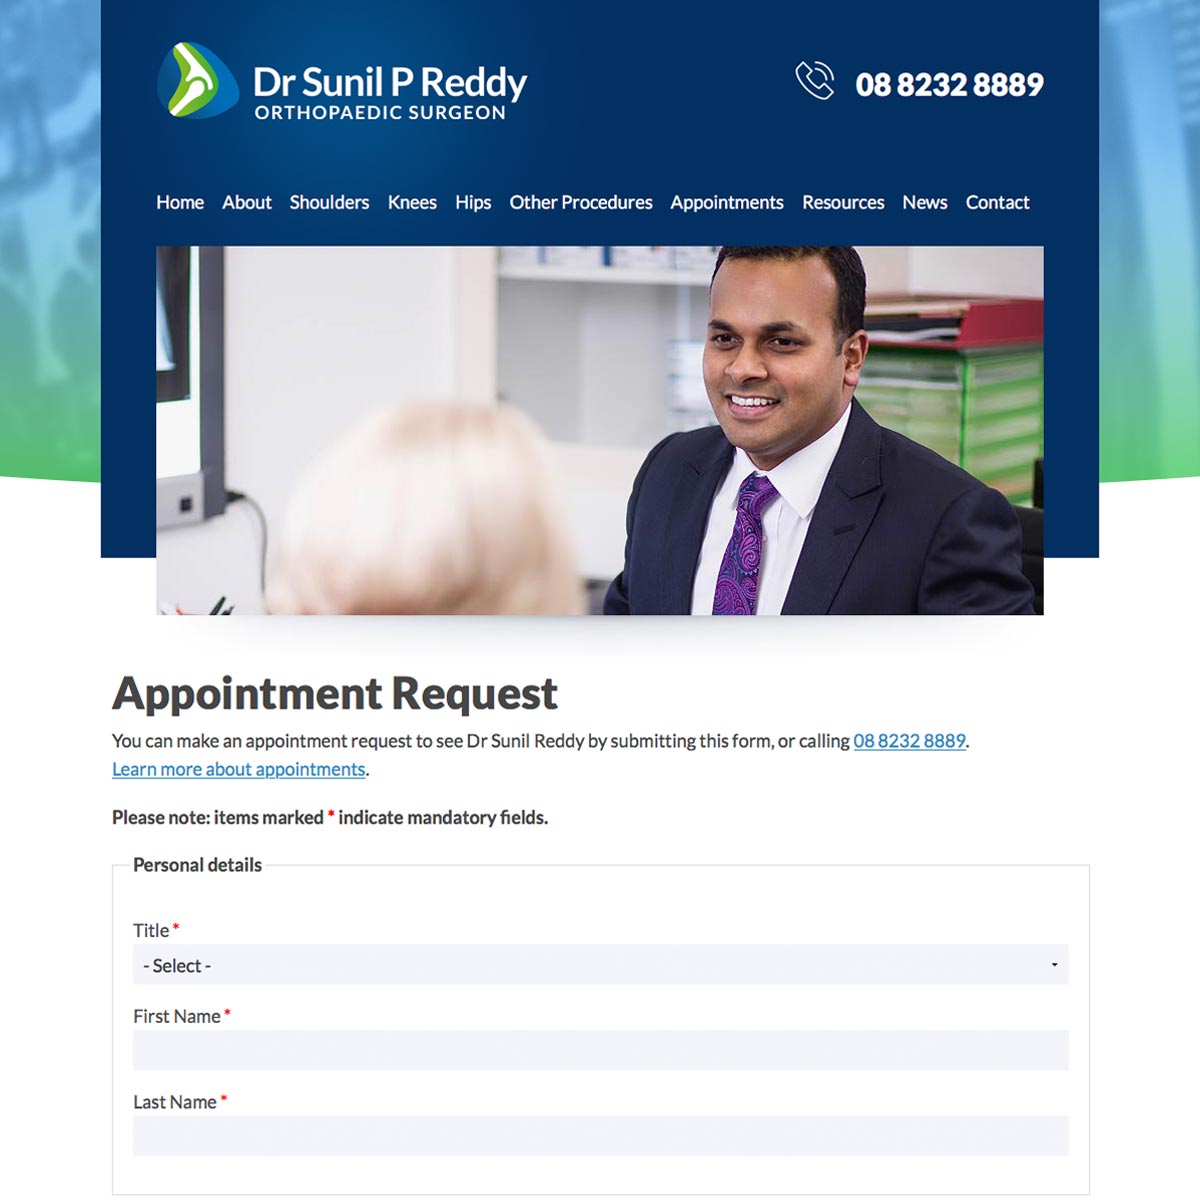 Dr Sunil Reddy - Appointment Request